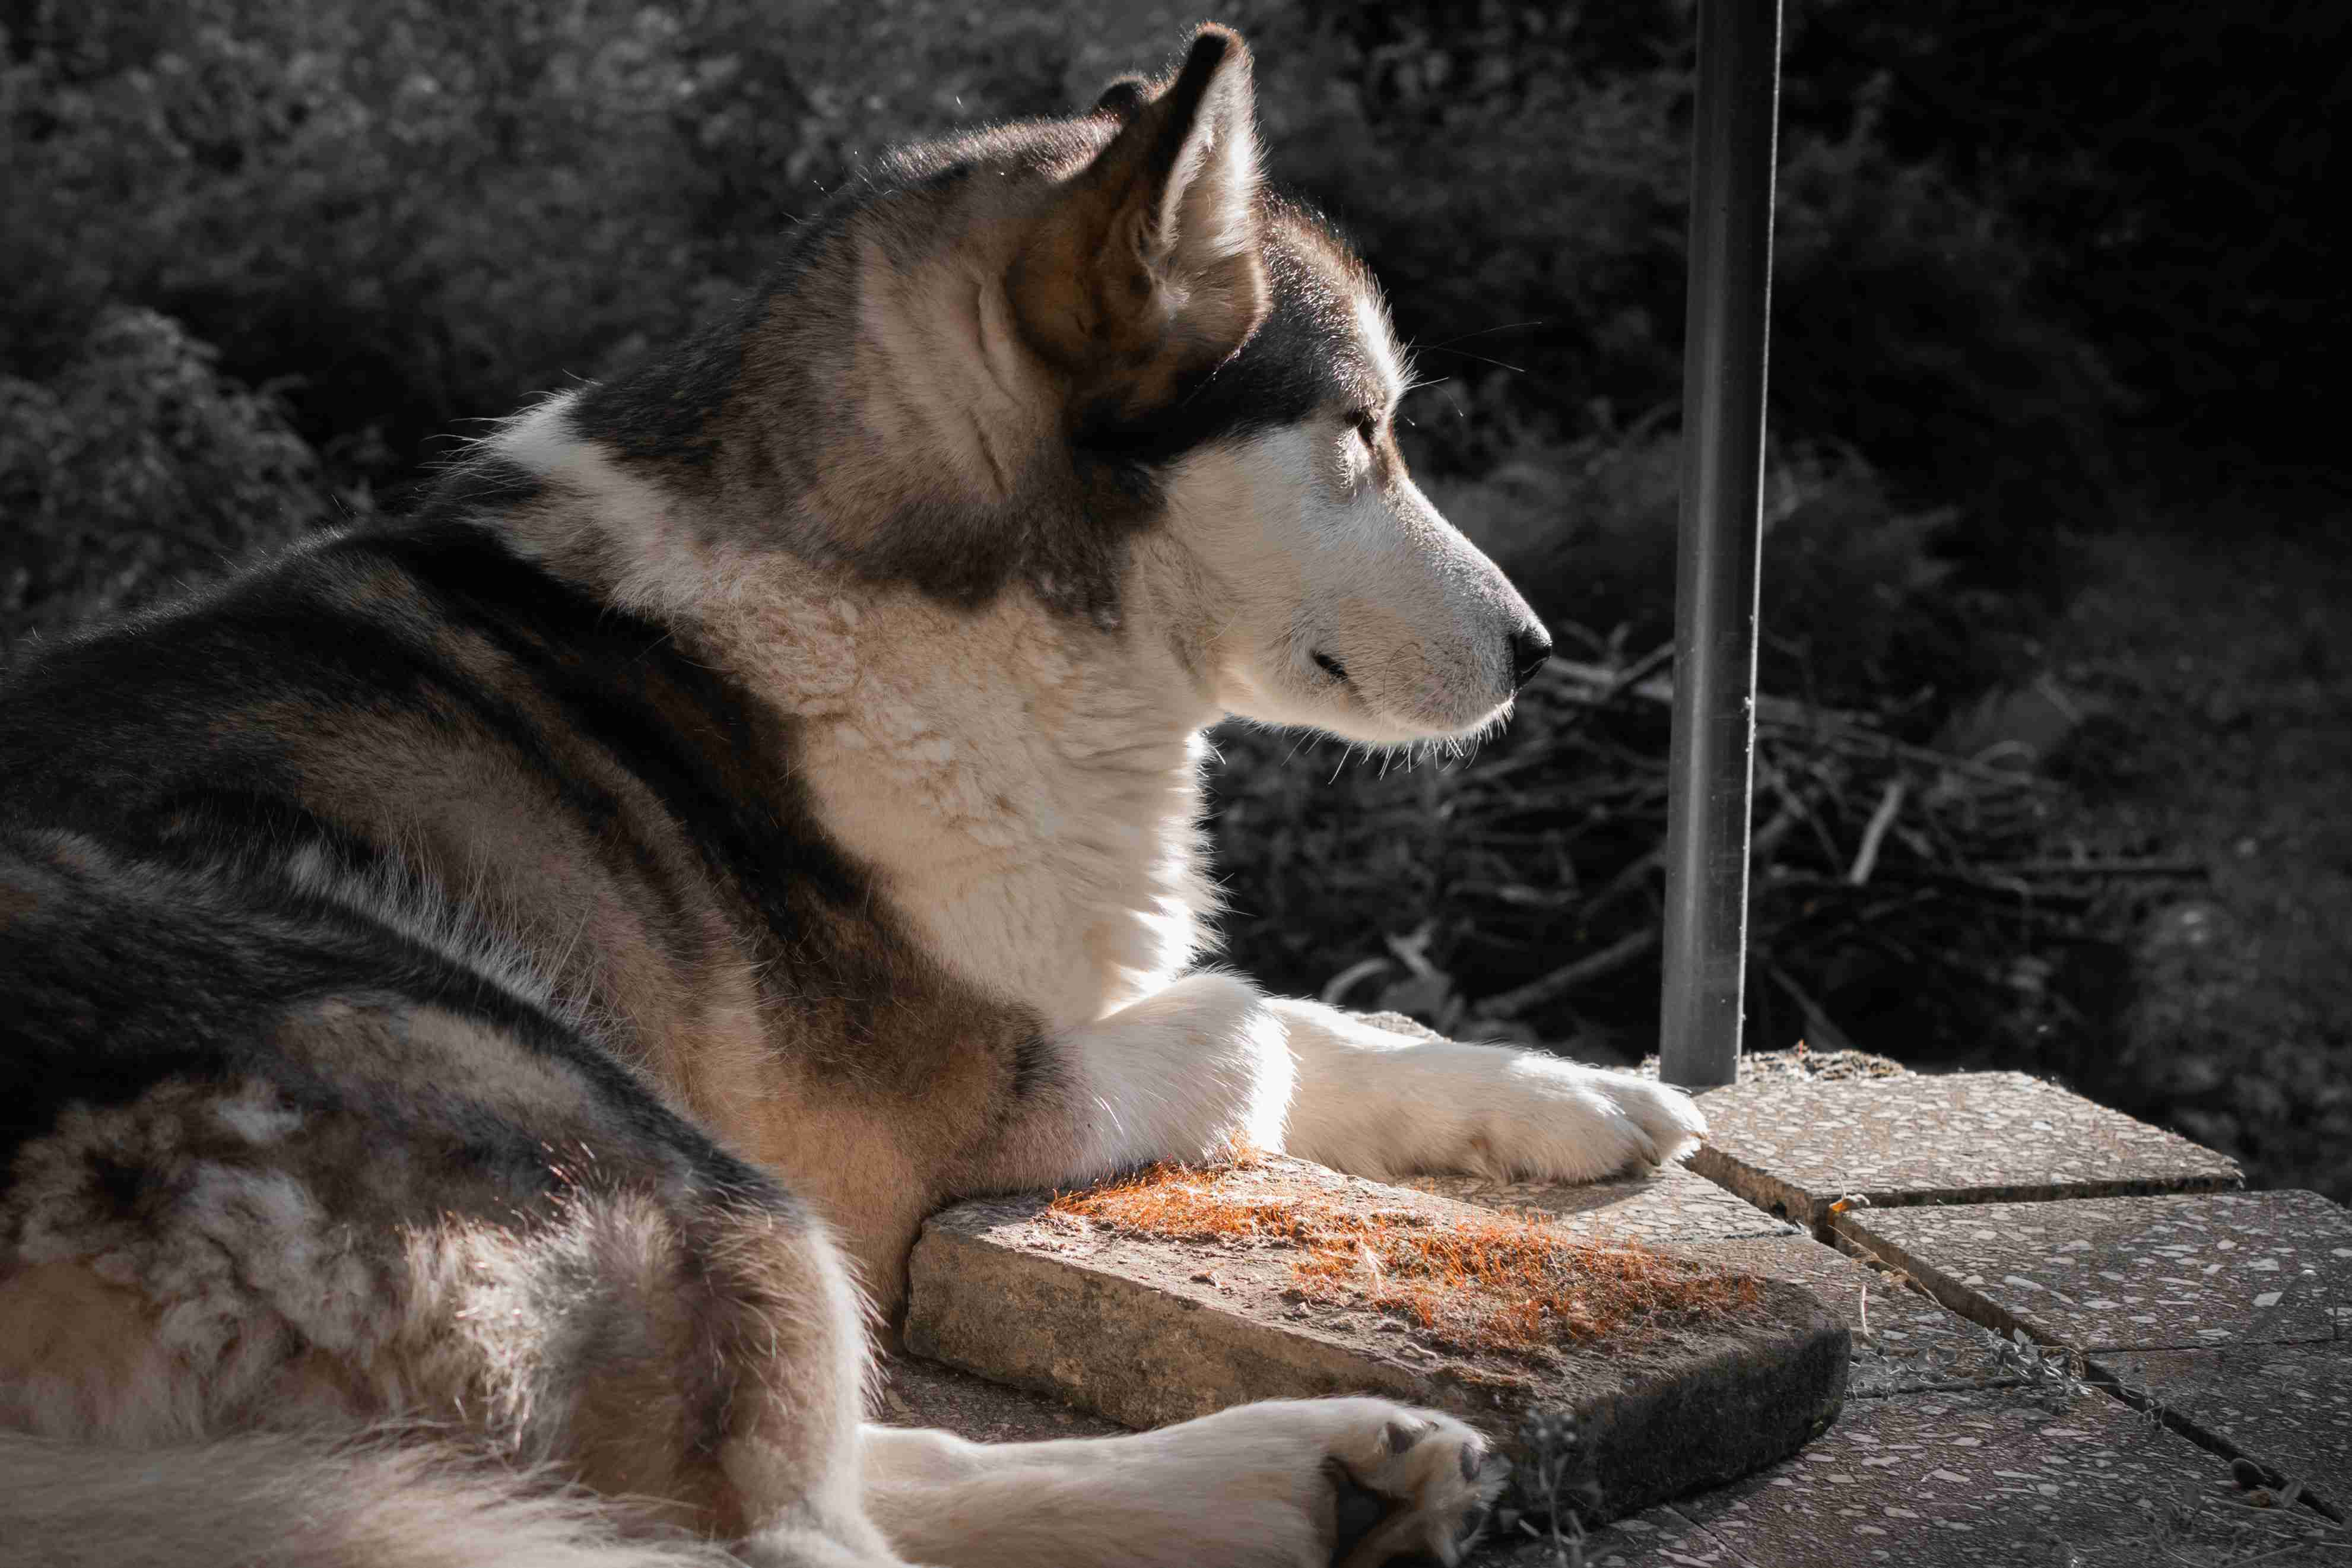 Alaskan Malamute Puppy Exercise: Finding the Right Balance